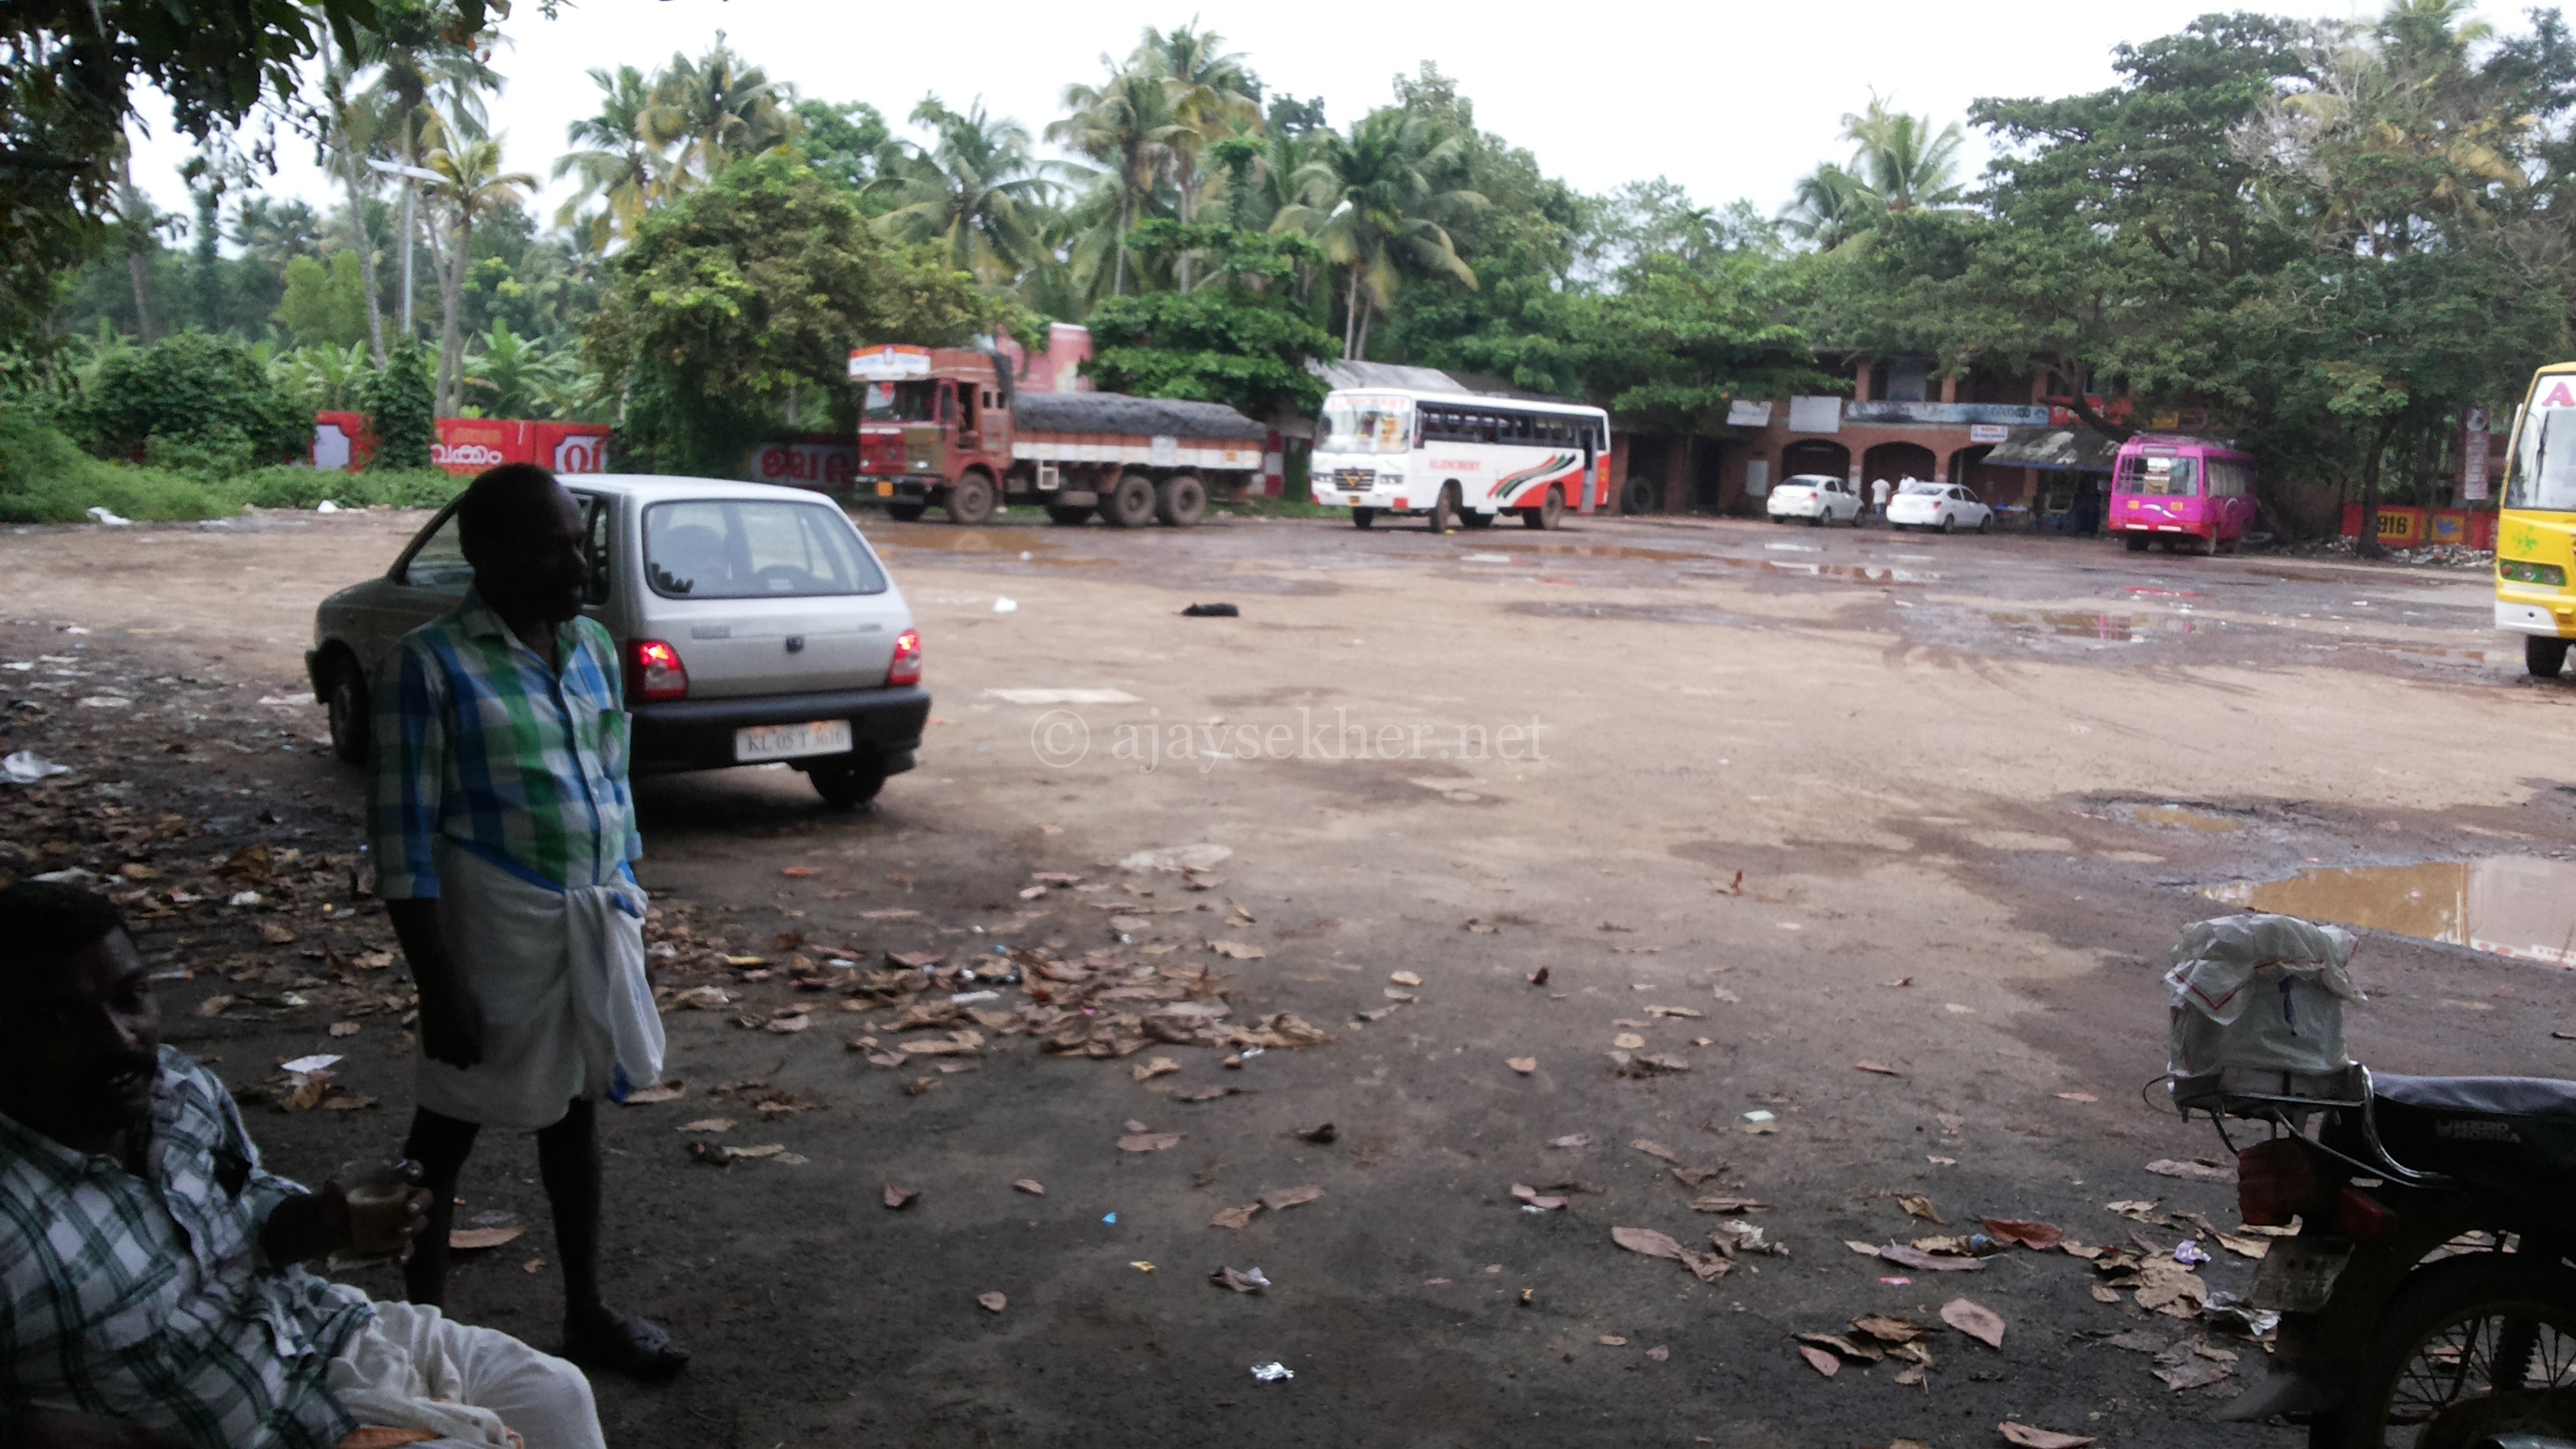 Dalava Kulam bus stand near the eastern gateway of the temple at Vaikam; the location of the old pond where the bodies of the massacred protesters where thrown into in early 19th century.